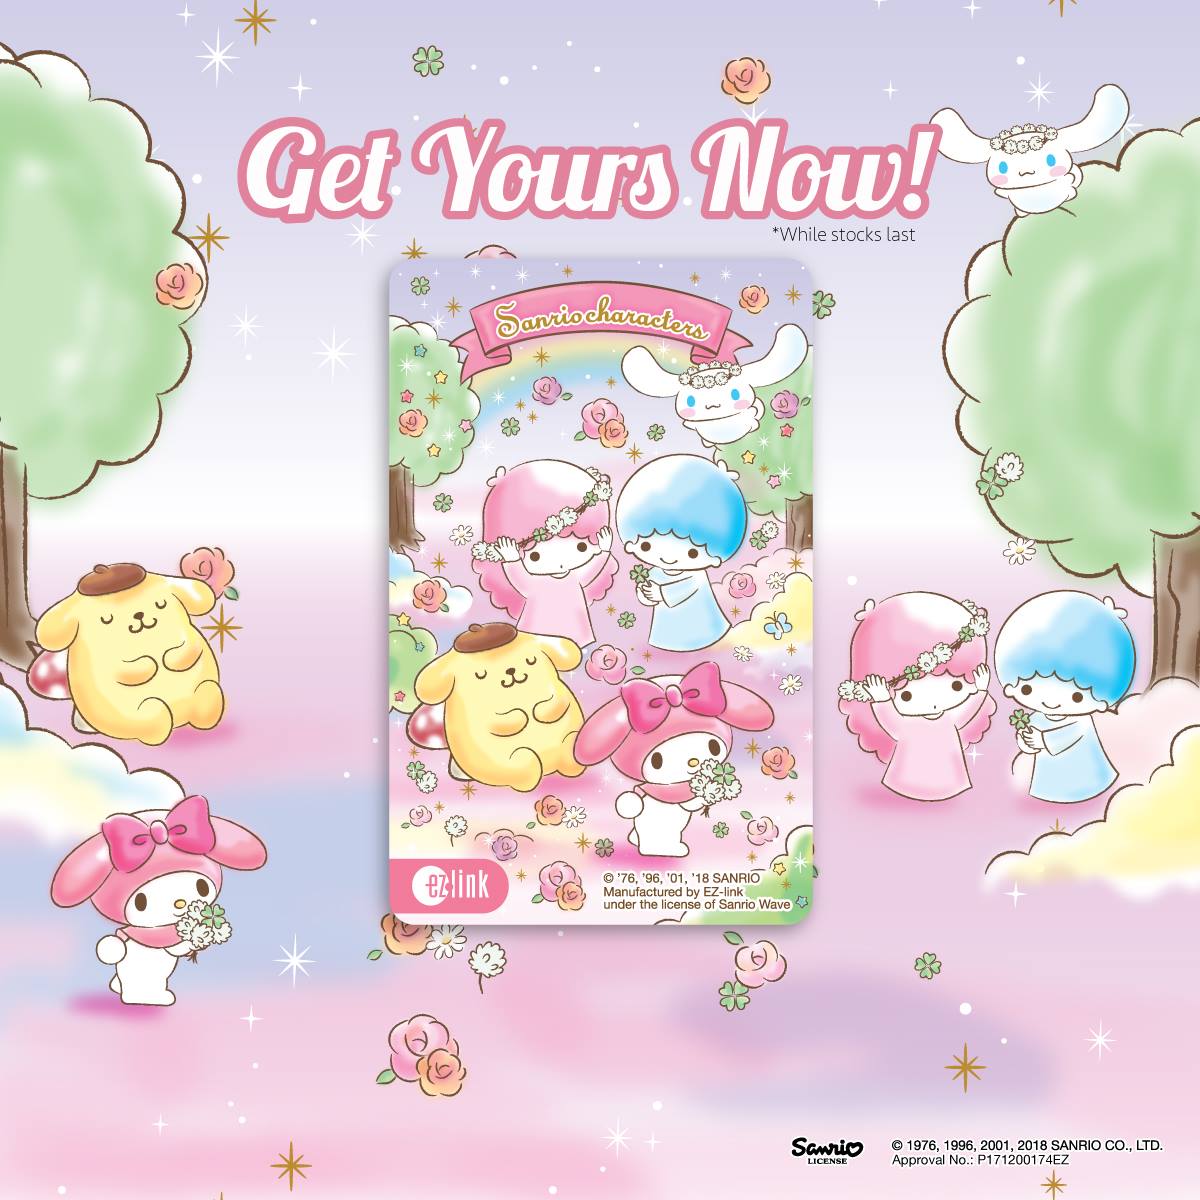 EZ-Link released NEW Sanrio ez-link cards for the upcoming Chinese New Year and Valentine’s Day - 2